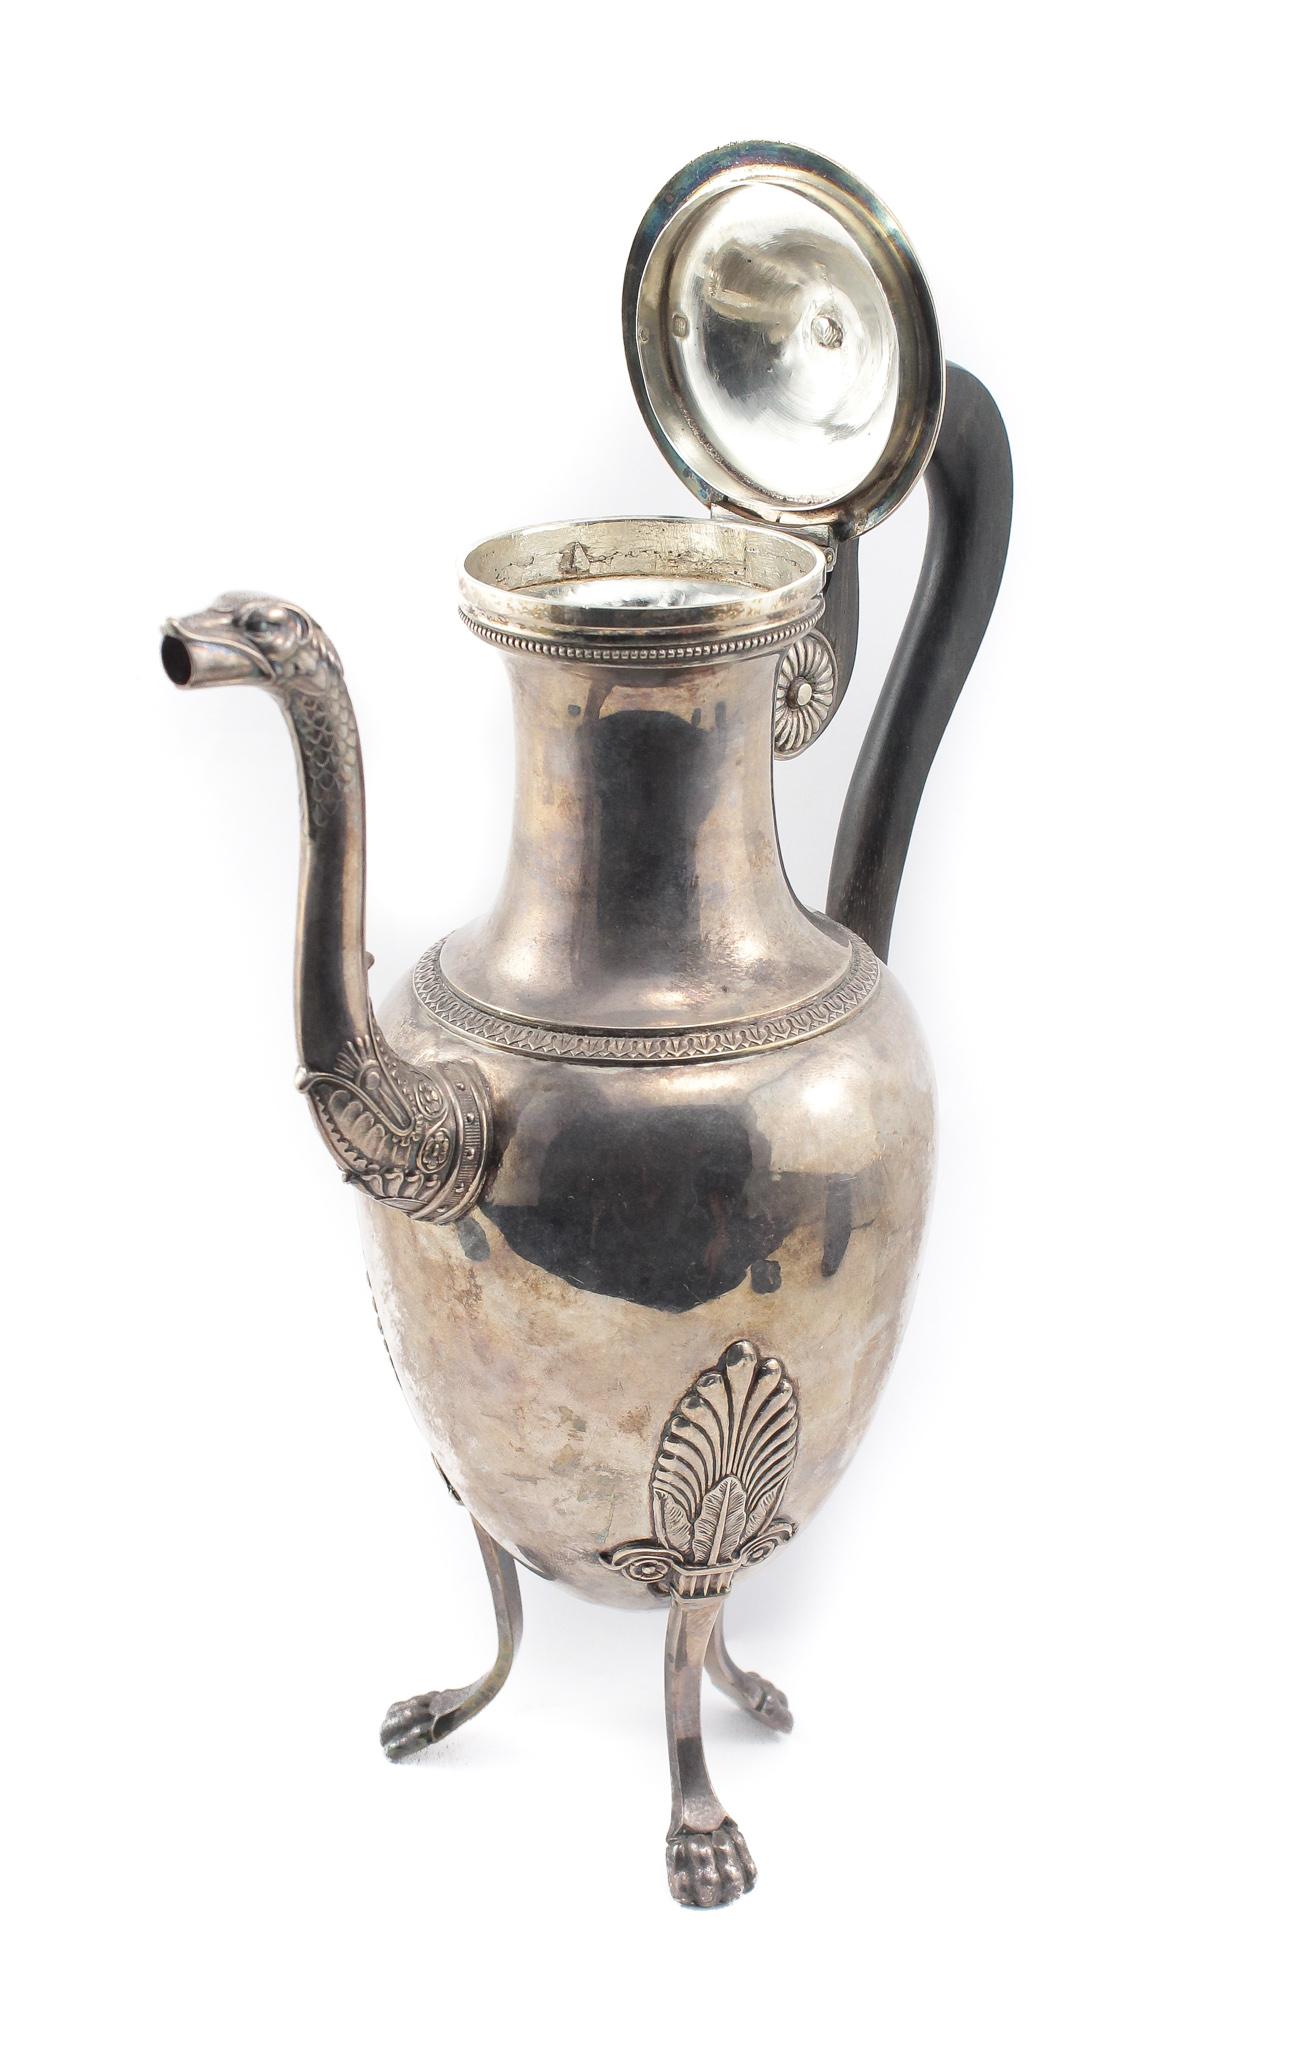 This is a stunning example of French Antique Sterling Silver in this Tall Tea Pot with a Black Finished Wooden Handle. The magnificent detail is of an Ostrich with a height of 10 3/4 inches and width of 7 1/4 inches. There is a Hallmark of a male